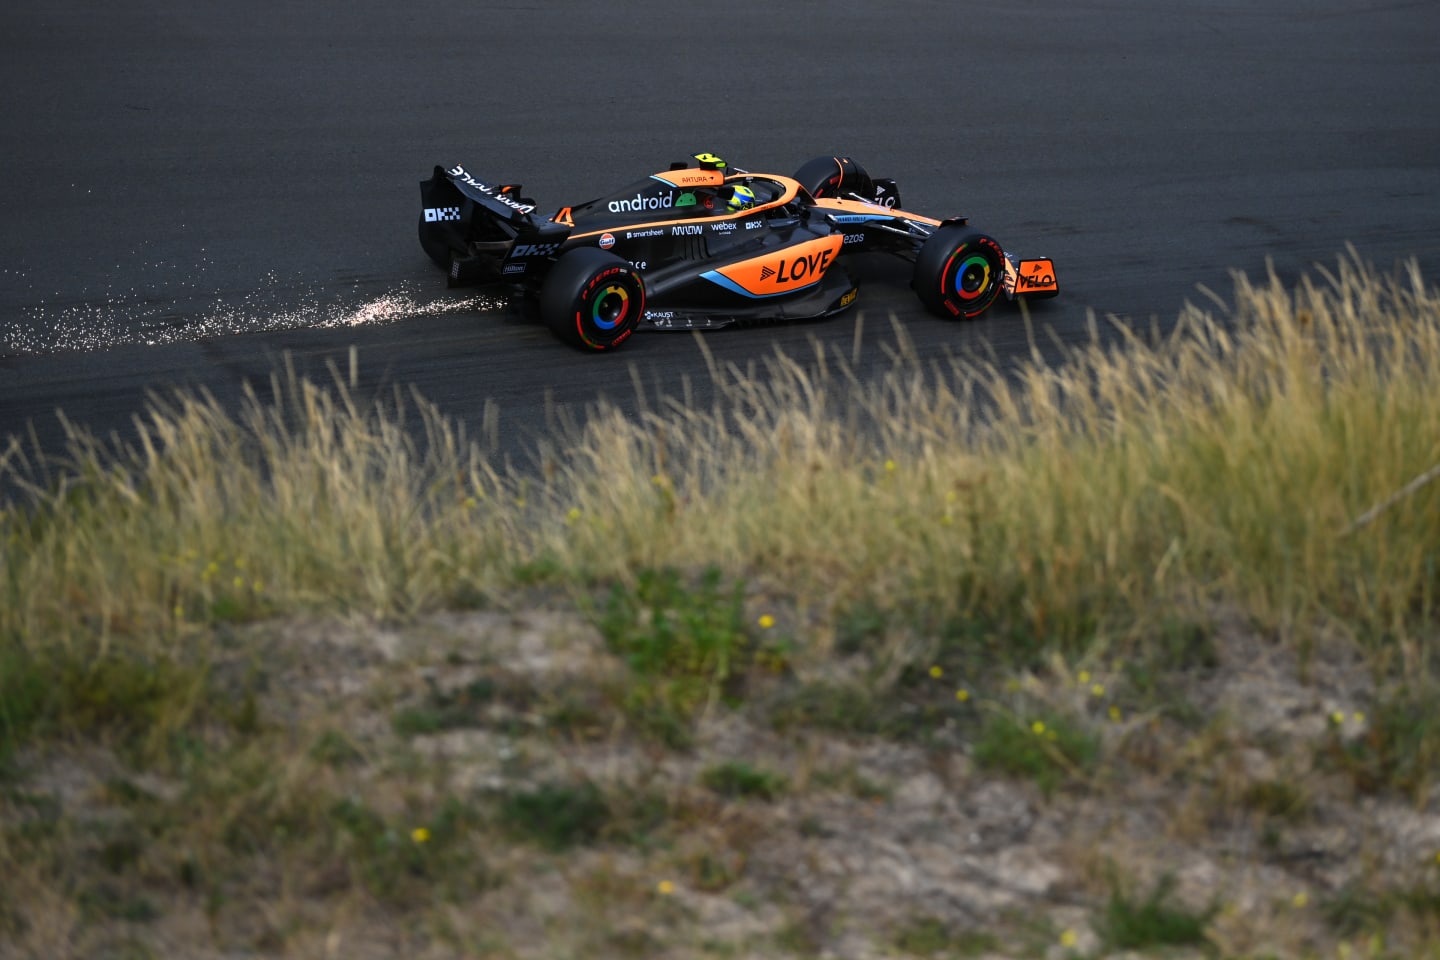 ZANDVOORT, NETHERLANDS - SEPTEMBER 02: Lando Norris of Great Britain driving the (4) McLaren MCL36 Mercedes on track during practice ahead of the F1 Grand Prix of The Netherlands at Circuit Zandvoort on September 02, 2022 in Zandvoort, Netherlands. (Photo by Dan Mullan/Getty Images)